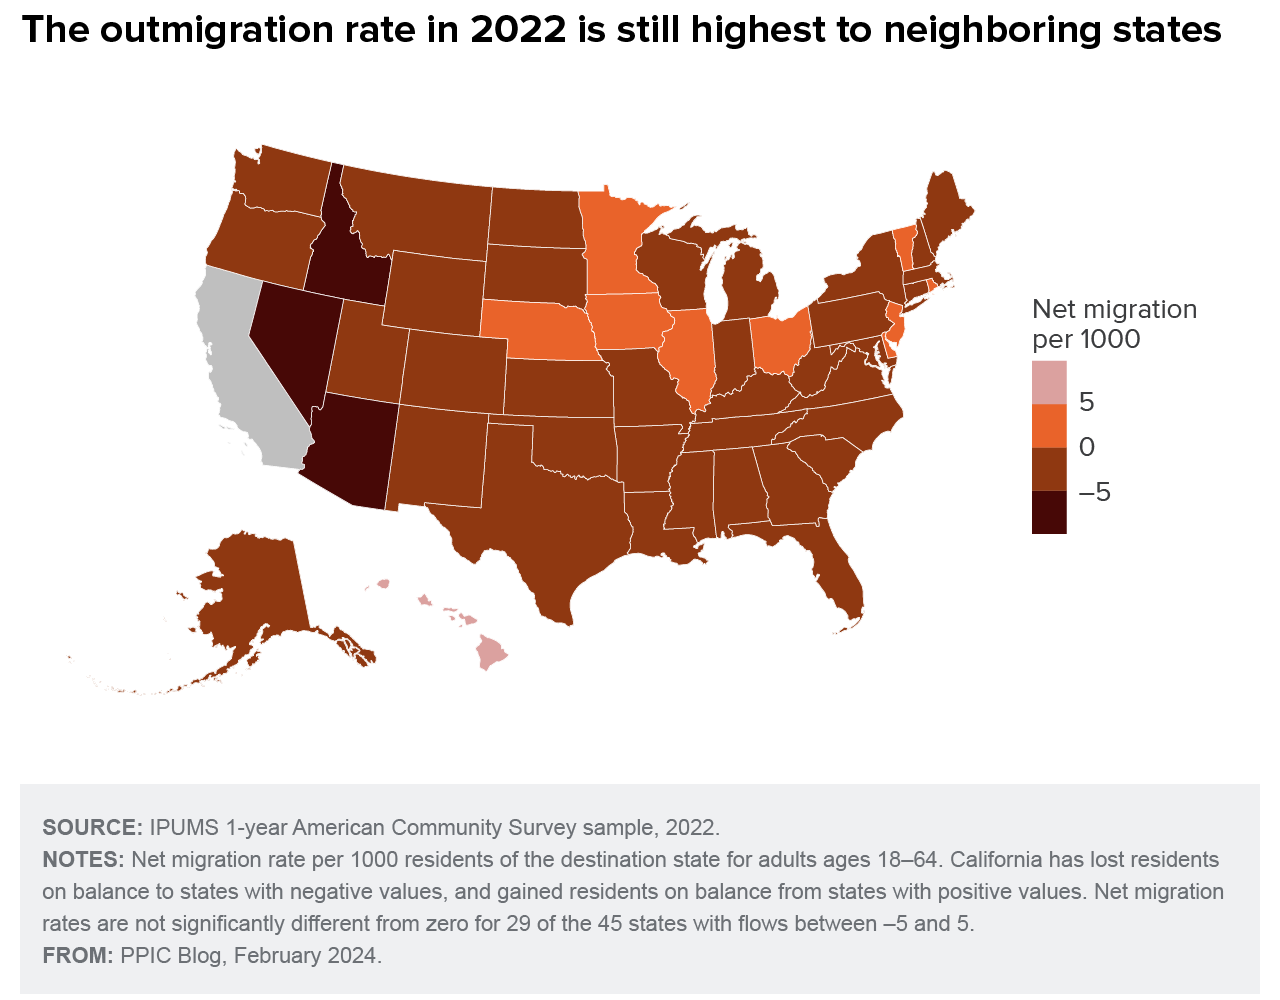 The outmigration rate in 2022 is still highest to neighboring states